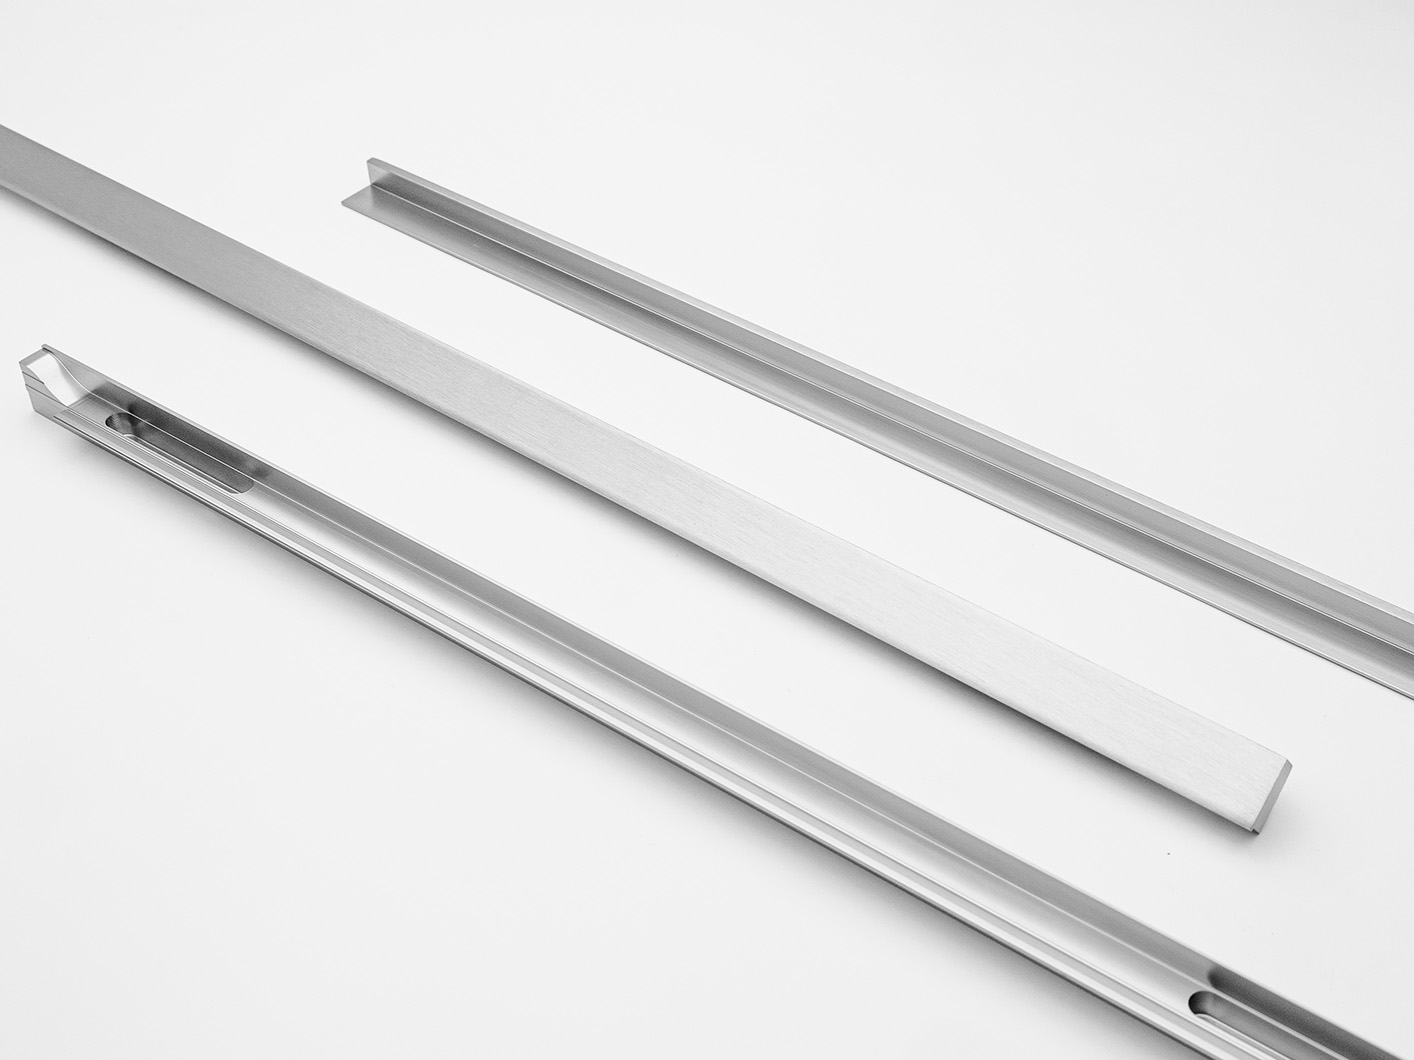 Oven decorative aluminium profiles - Milled Brushed Anodized Stainless Steel